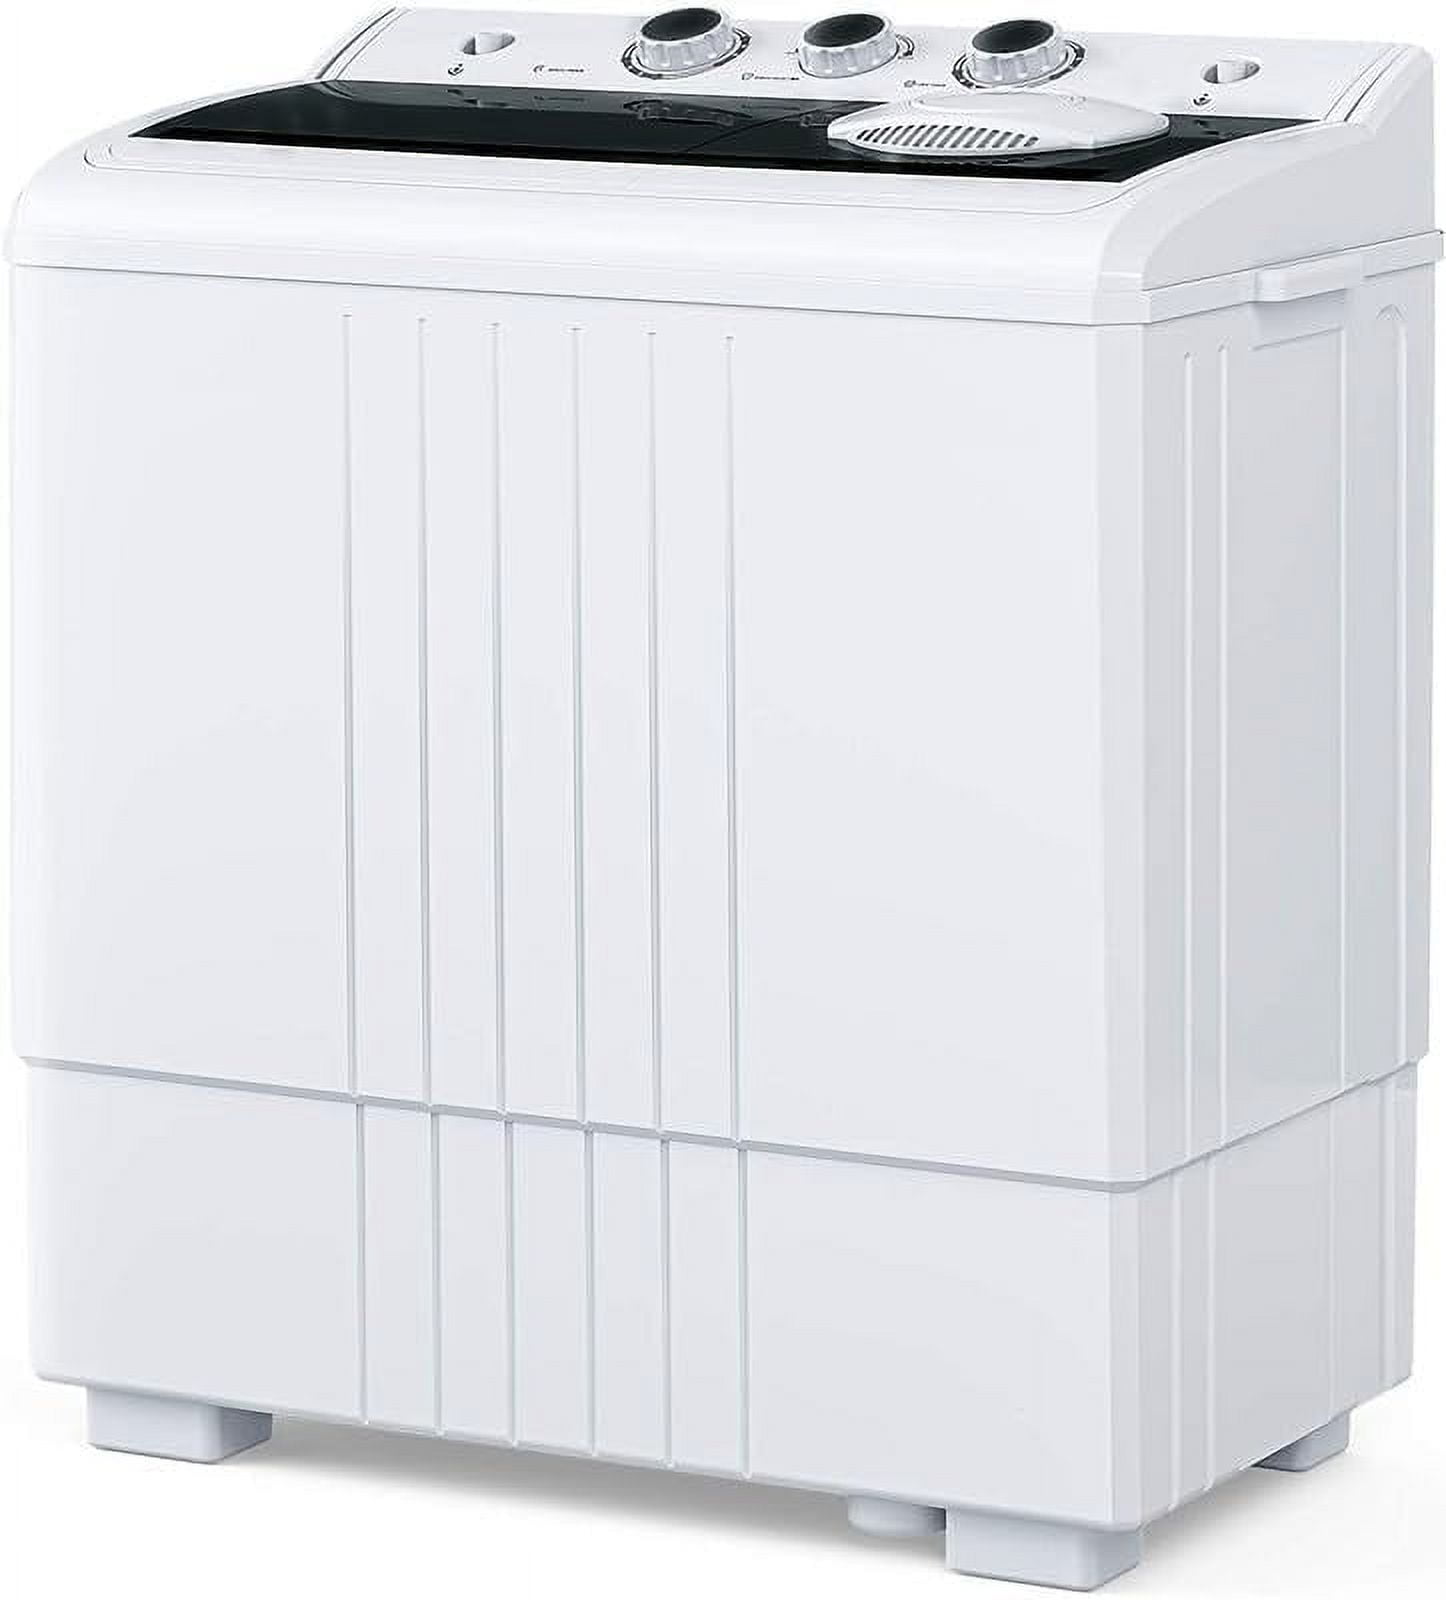 Best Compact Washer and Dryer for Tiny House - Skinnedcartree